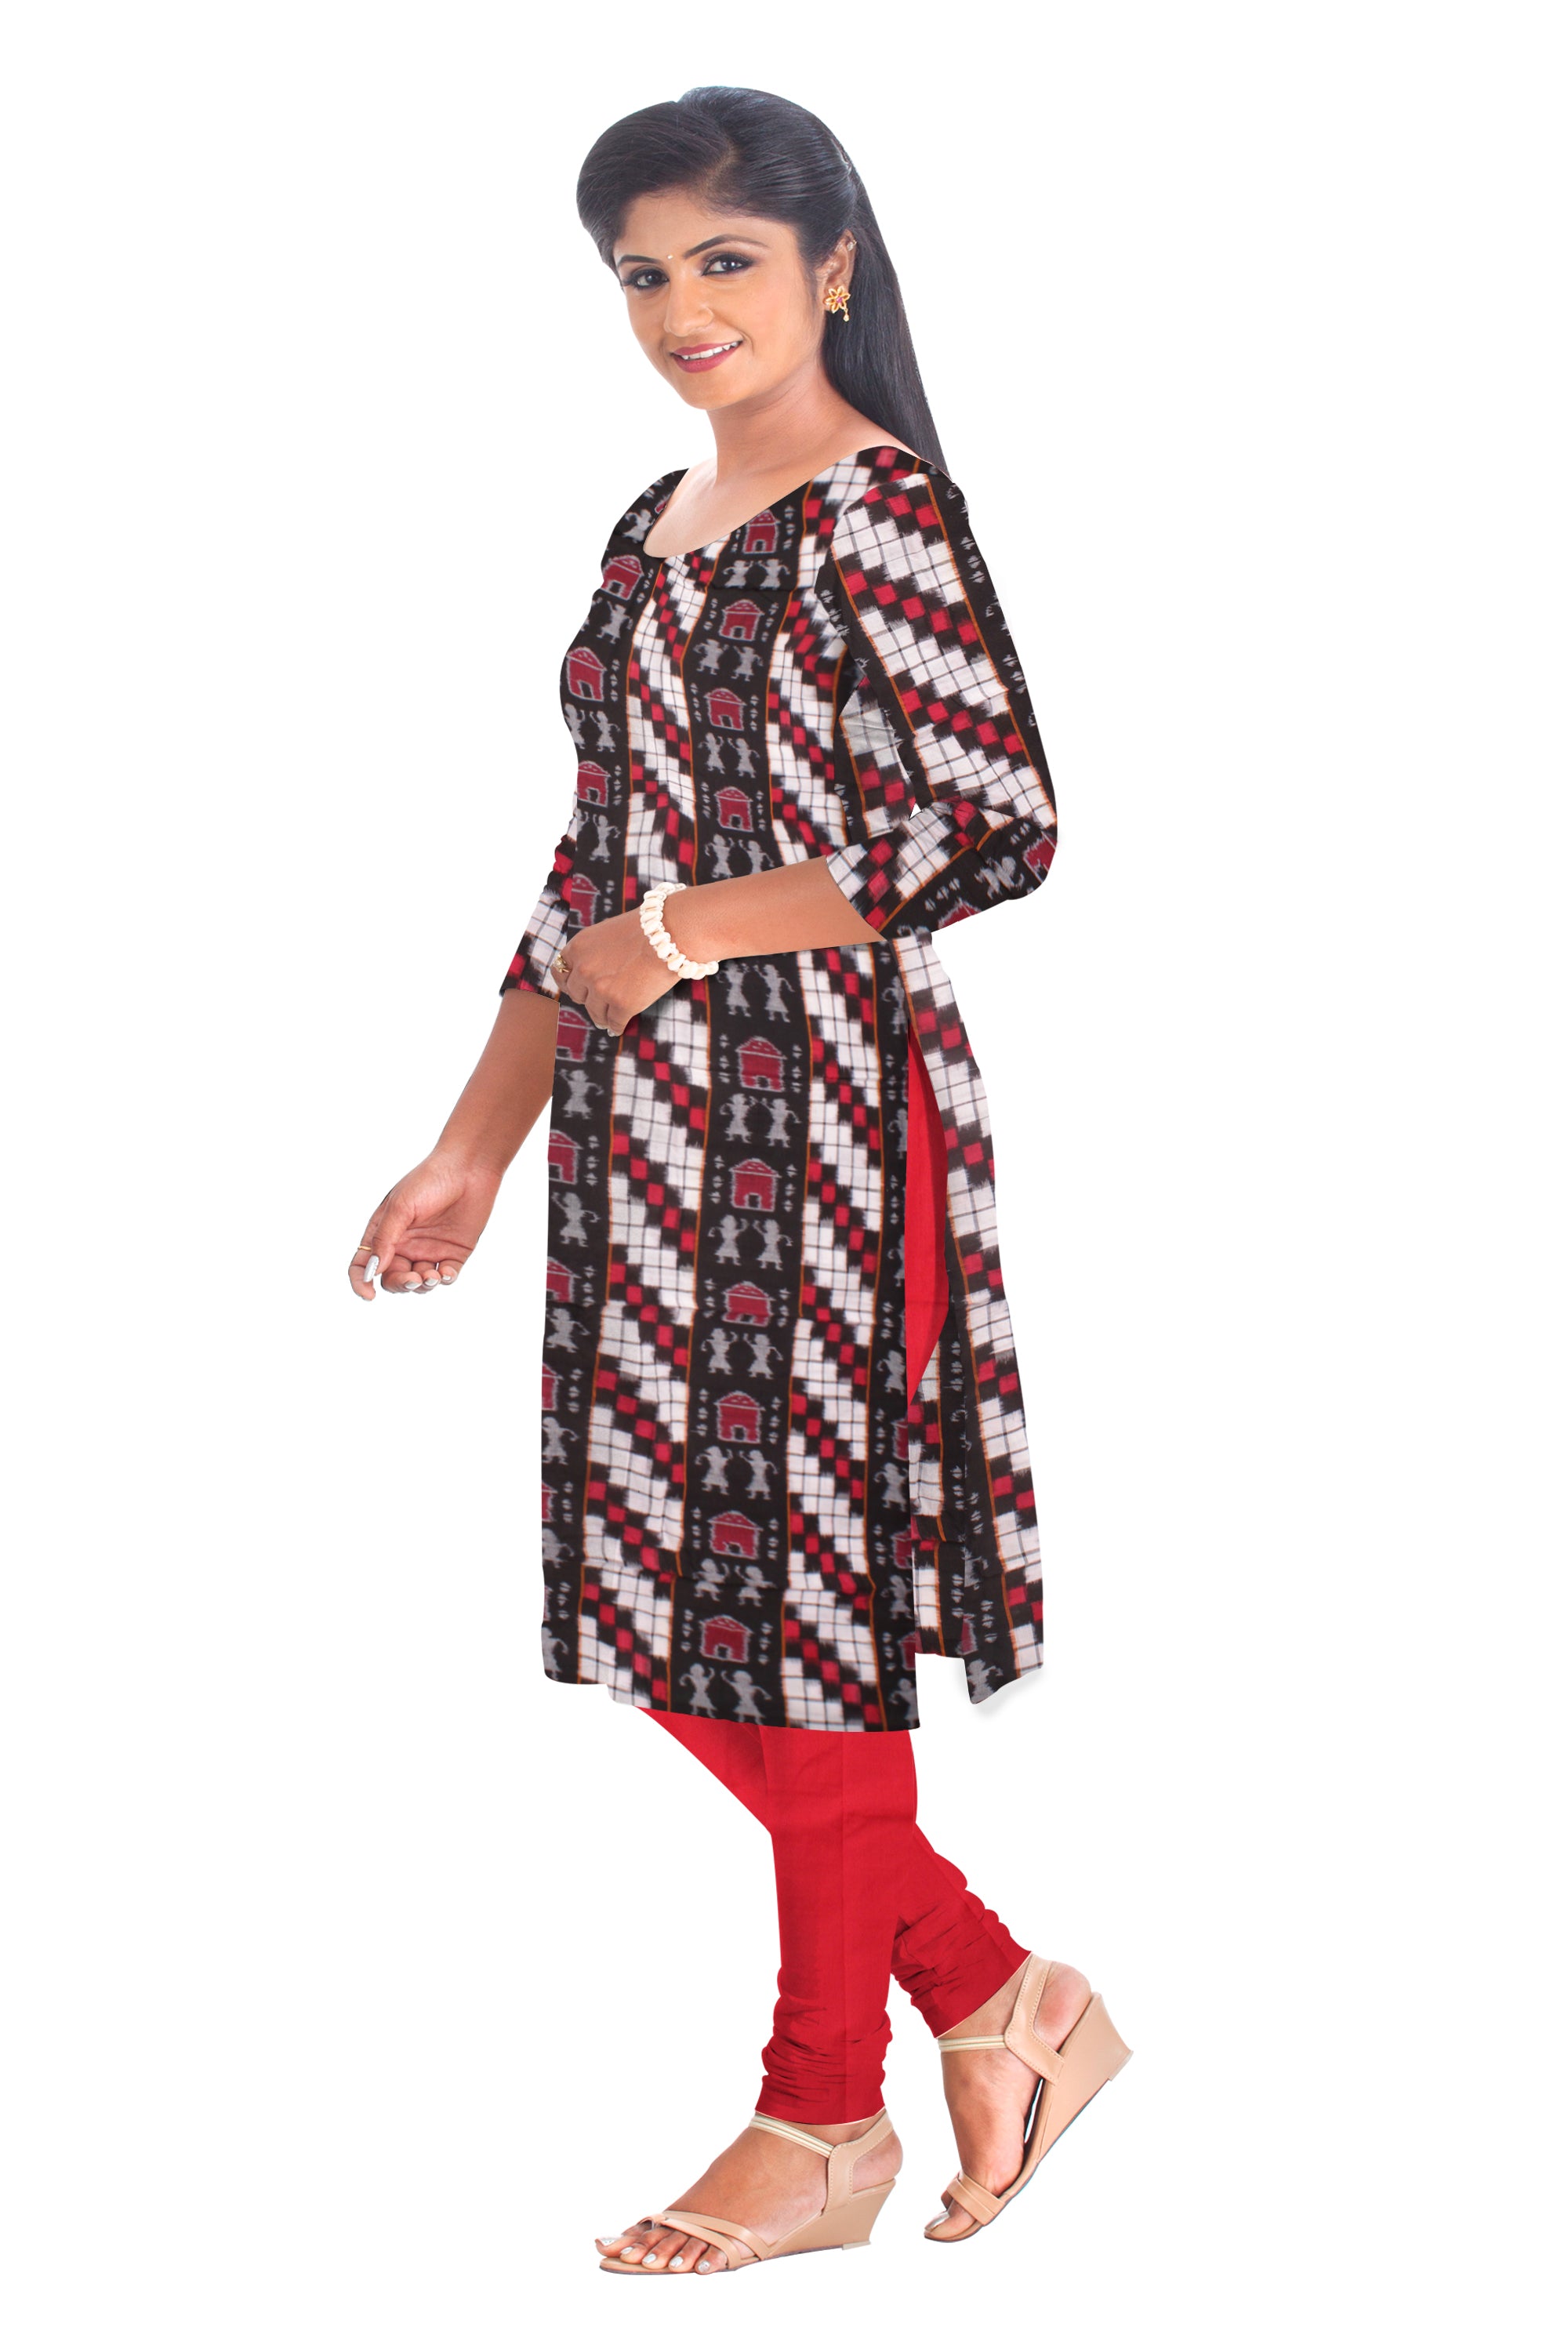 Cotton Dress Material in terracotta and pasapali pattern White, Red and Black color. Black and red colour  Dupatta  UNSTITCHED DRESS SET - Koshali Arts & Crafts Enterprise